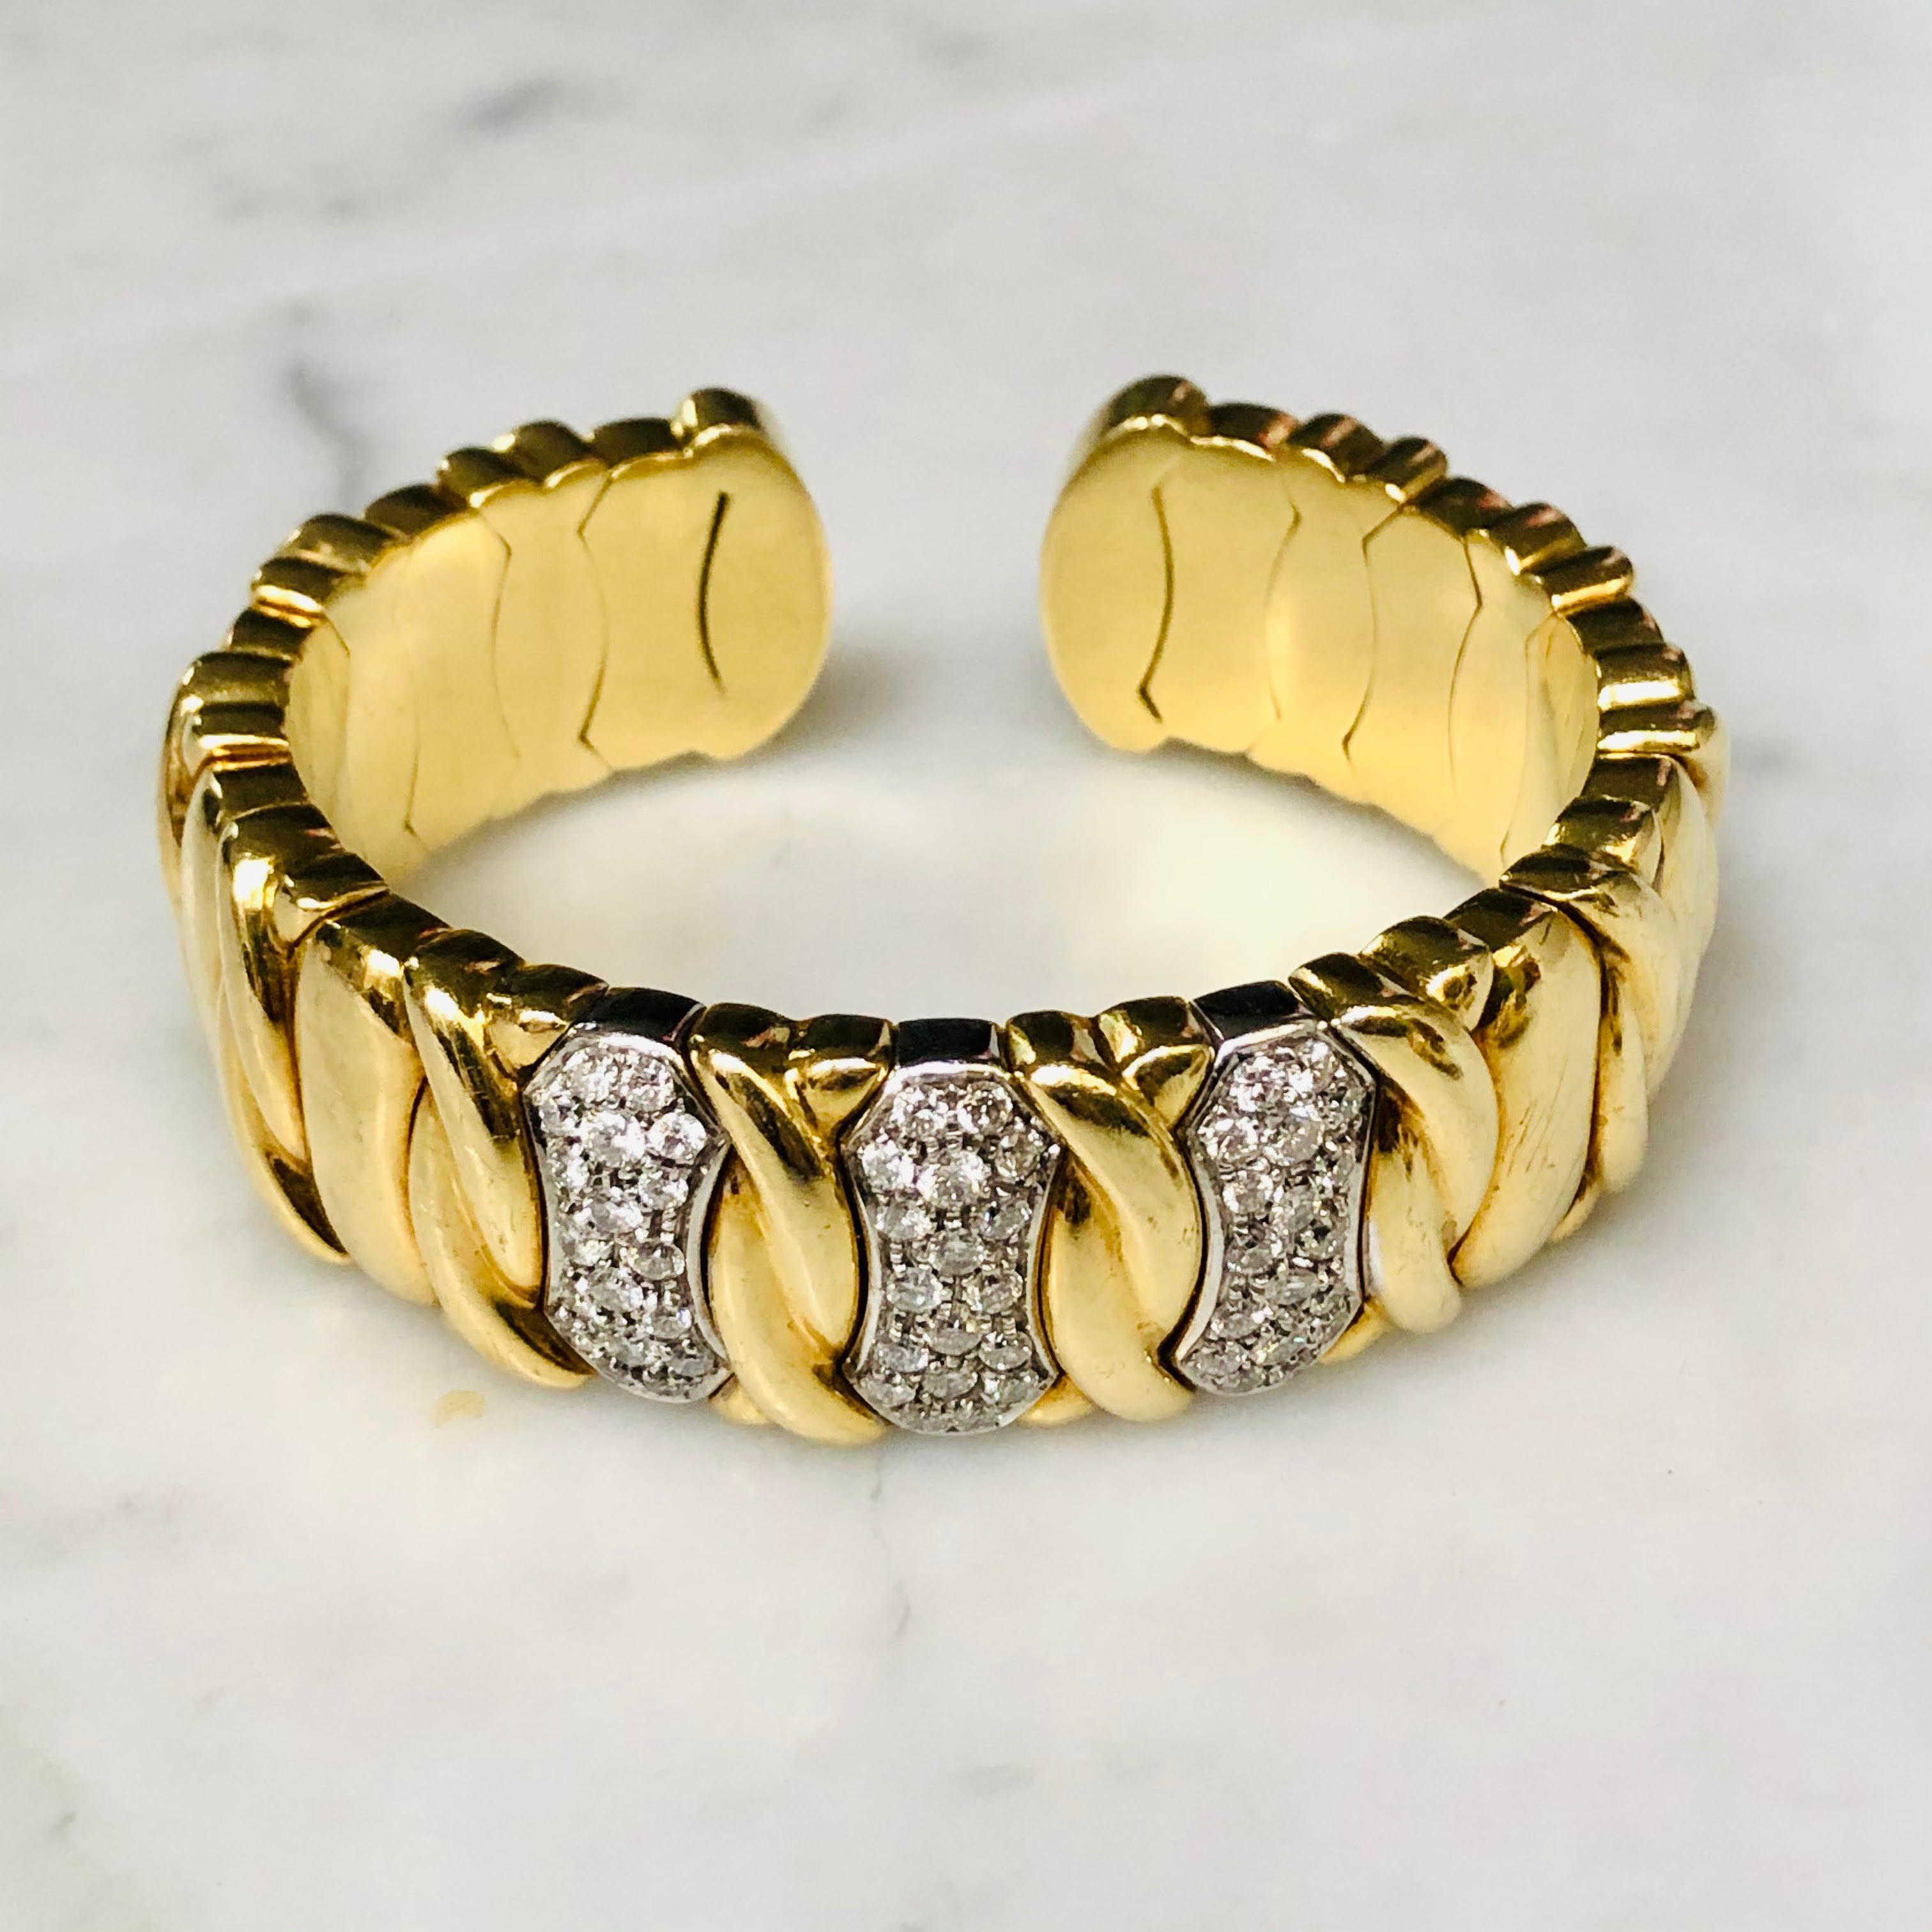 Gold and diamond set cuff bracelet. Heavy 18ct gold bangle with diamond twist motif to create the perfect wrist ornament. 

18ct Yellow Gold 
Set with 2.65 carats of Diamonds 
Internal diameter 5.6cms 
Bracelet width 1.9cms 
Weight 91 grams 
